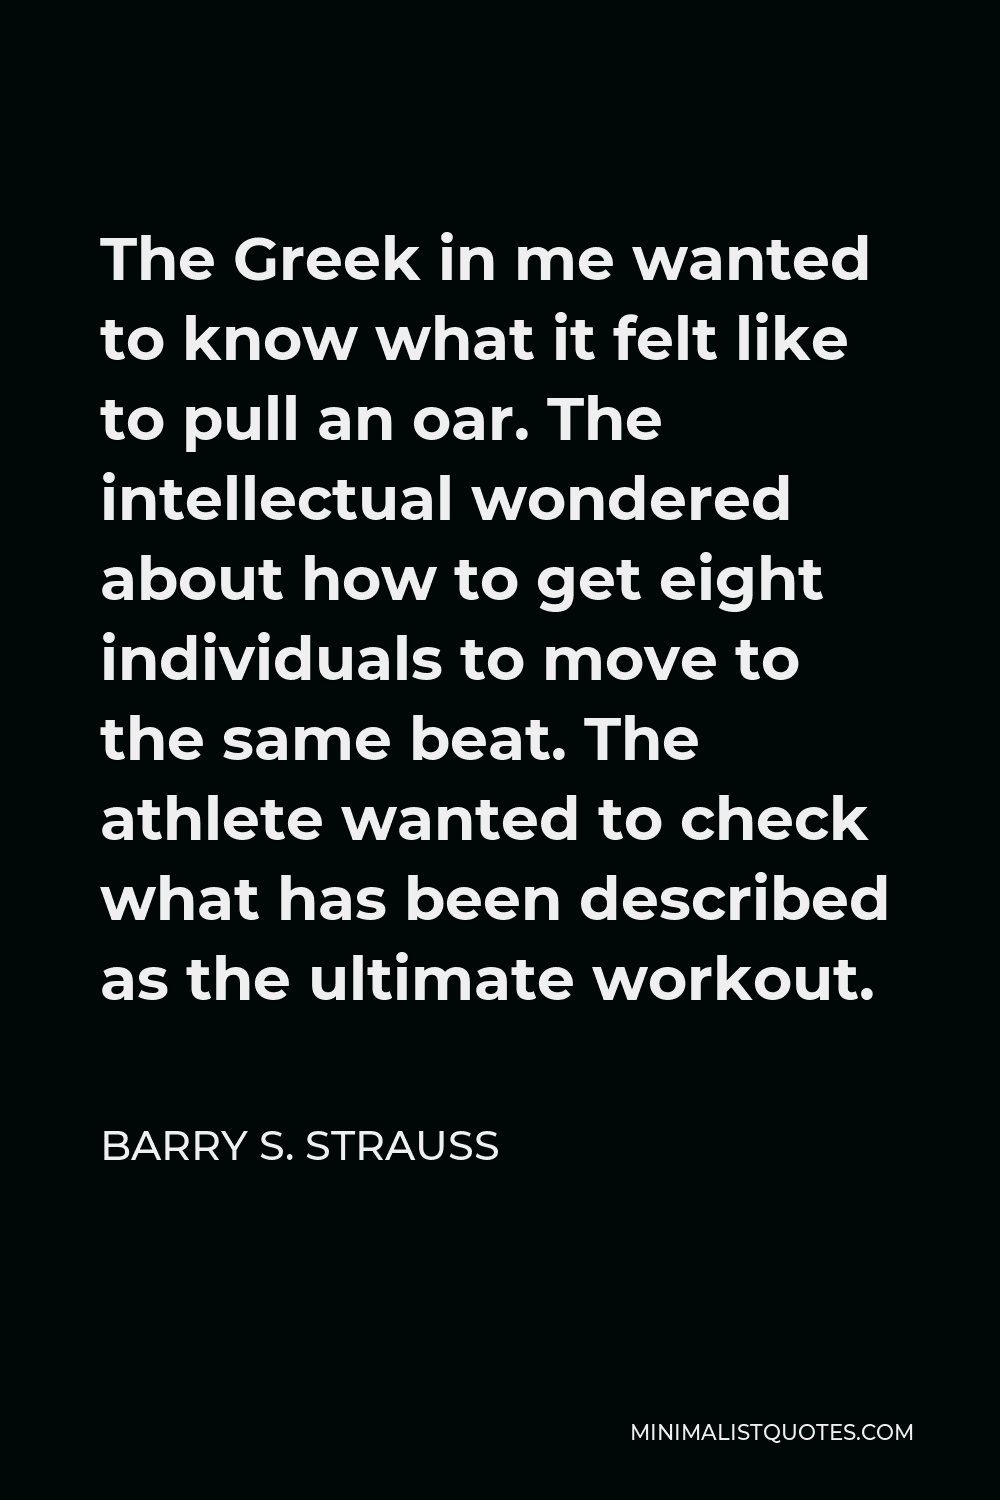 Barry S. Strauss Quote - The Greek in me wanted to know what it felt like to pull an oar. The intellectual wondered about how to get eight individuals to move to the same beat. The athlete wanted to check what has been described as the ultimate workout.